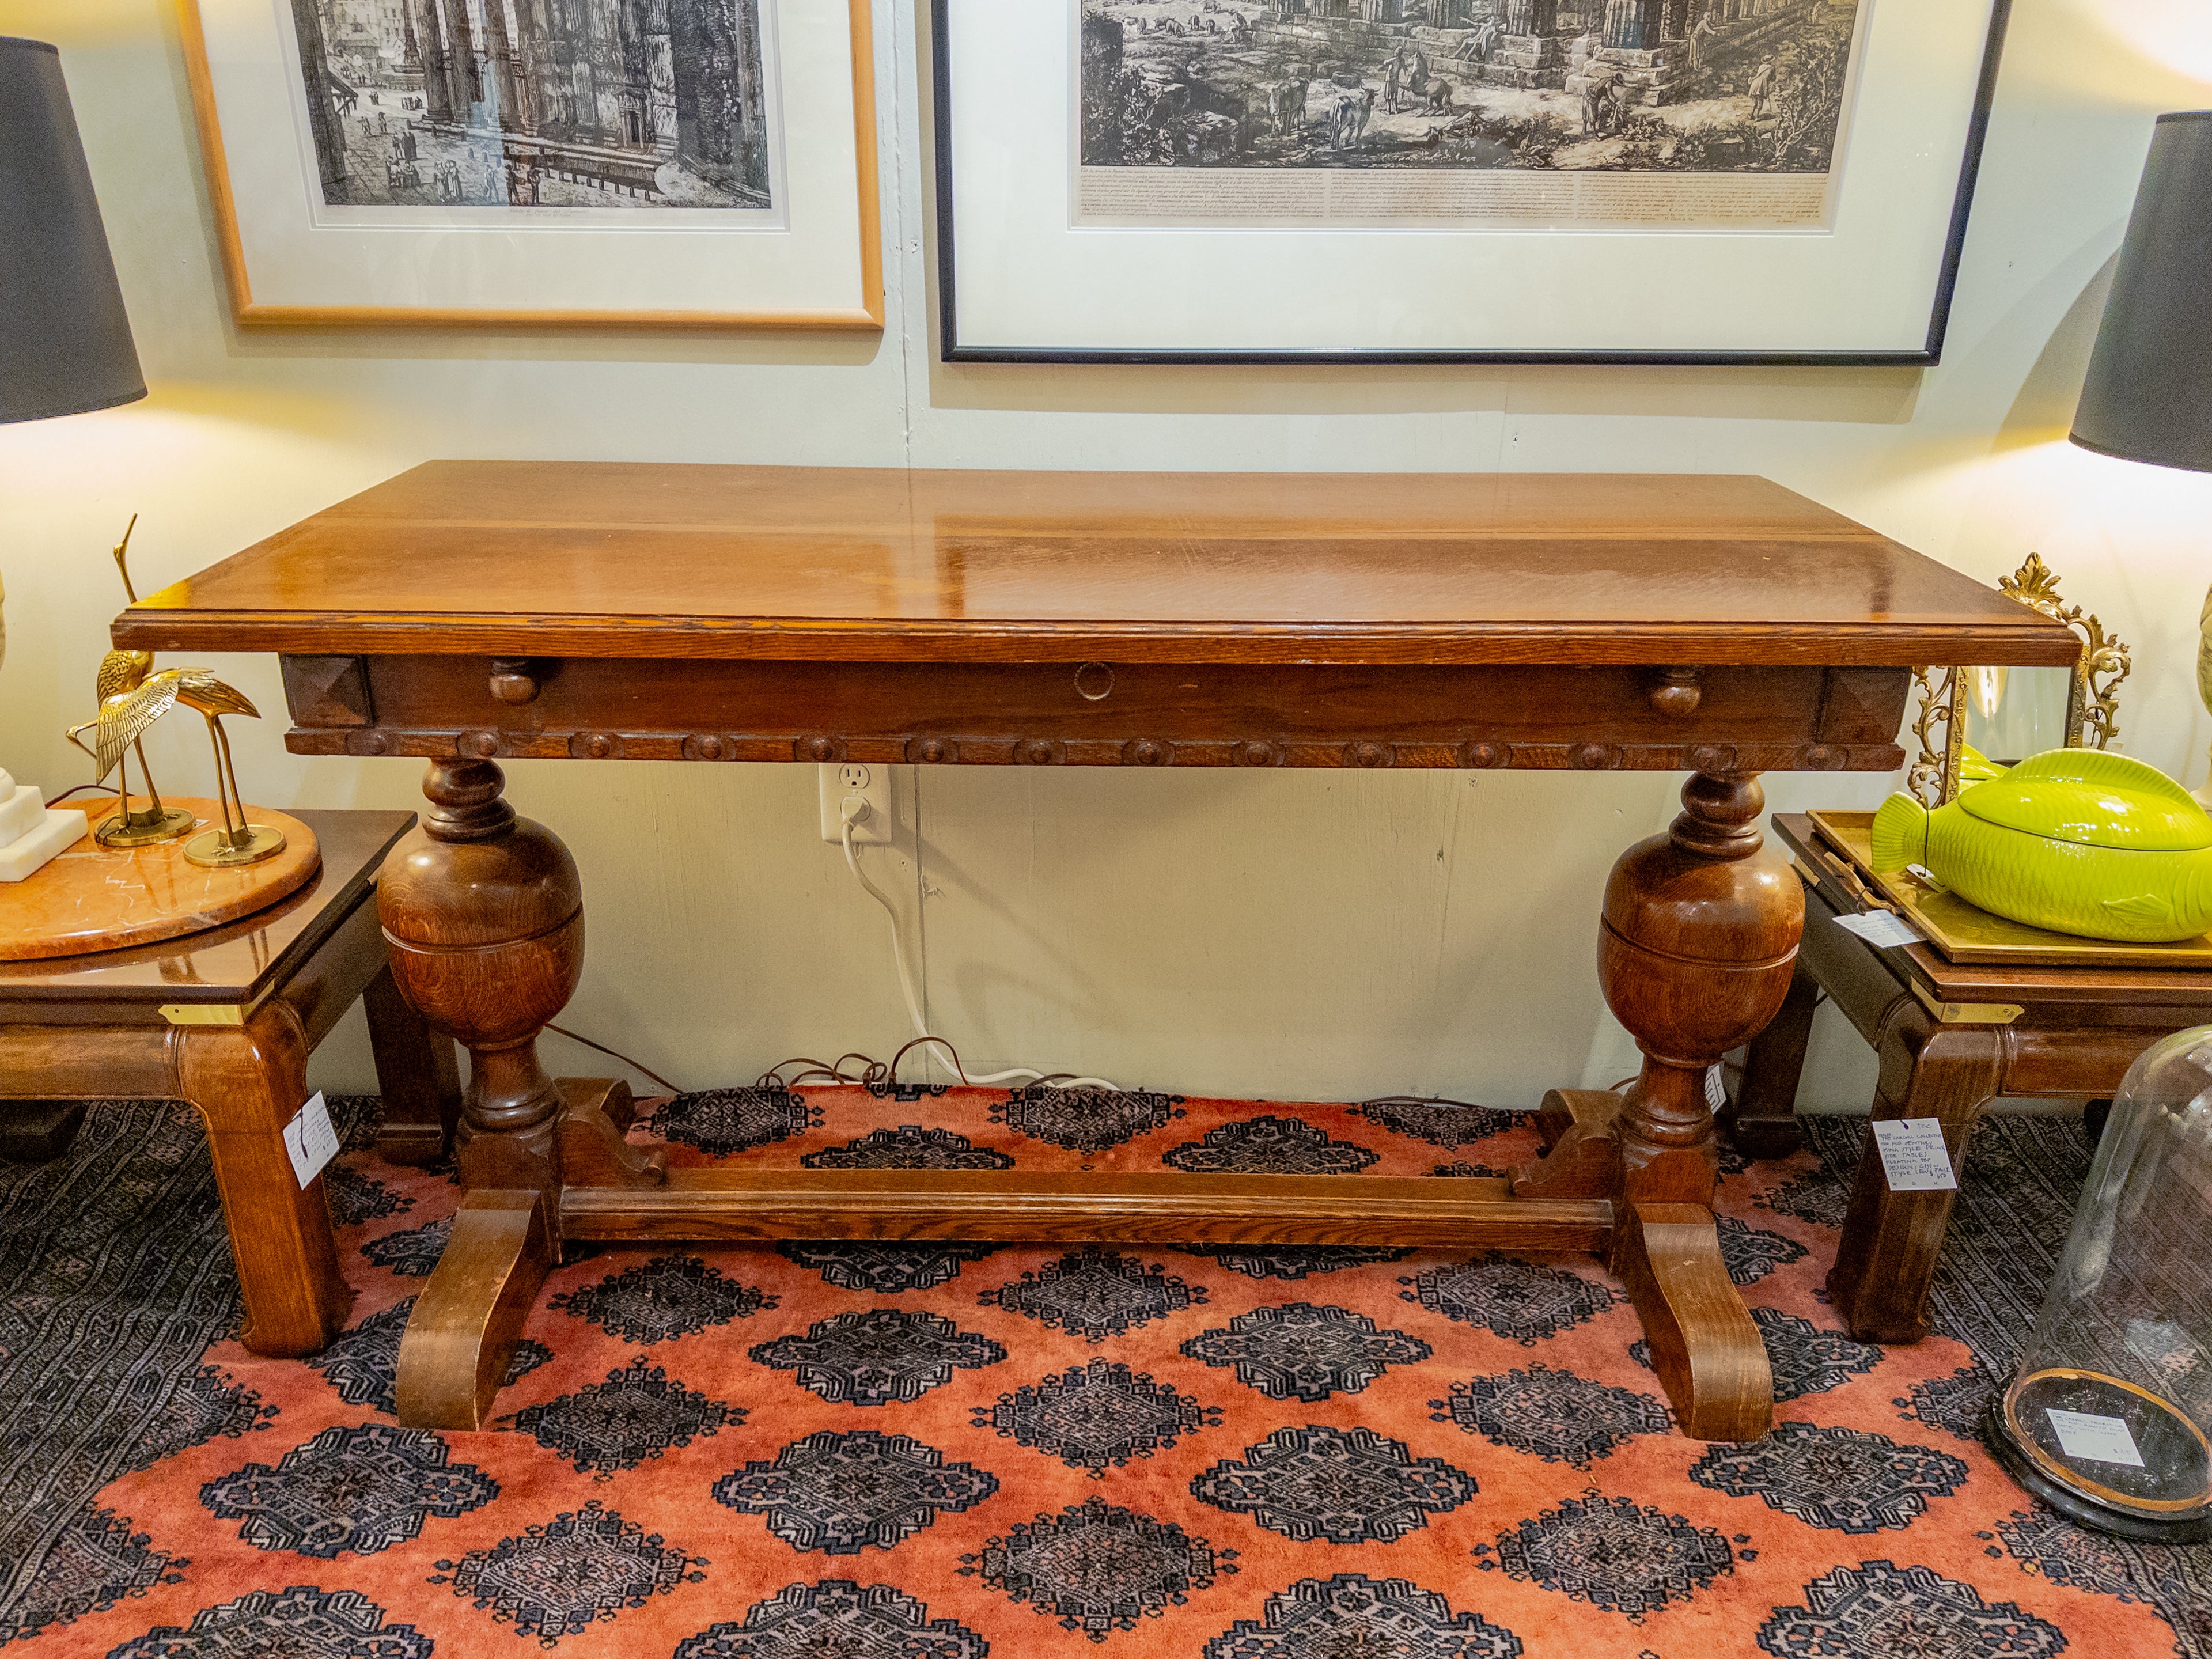 Transport yourself to the elegance of the 1920s with this charming English Oak Butterfly Table, a testament to the era's fine craftsmanship. The table boasts a trestle base, exuding a rustic yet sophisticated charm typical of the period. Crafted